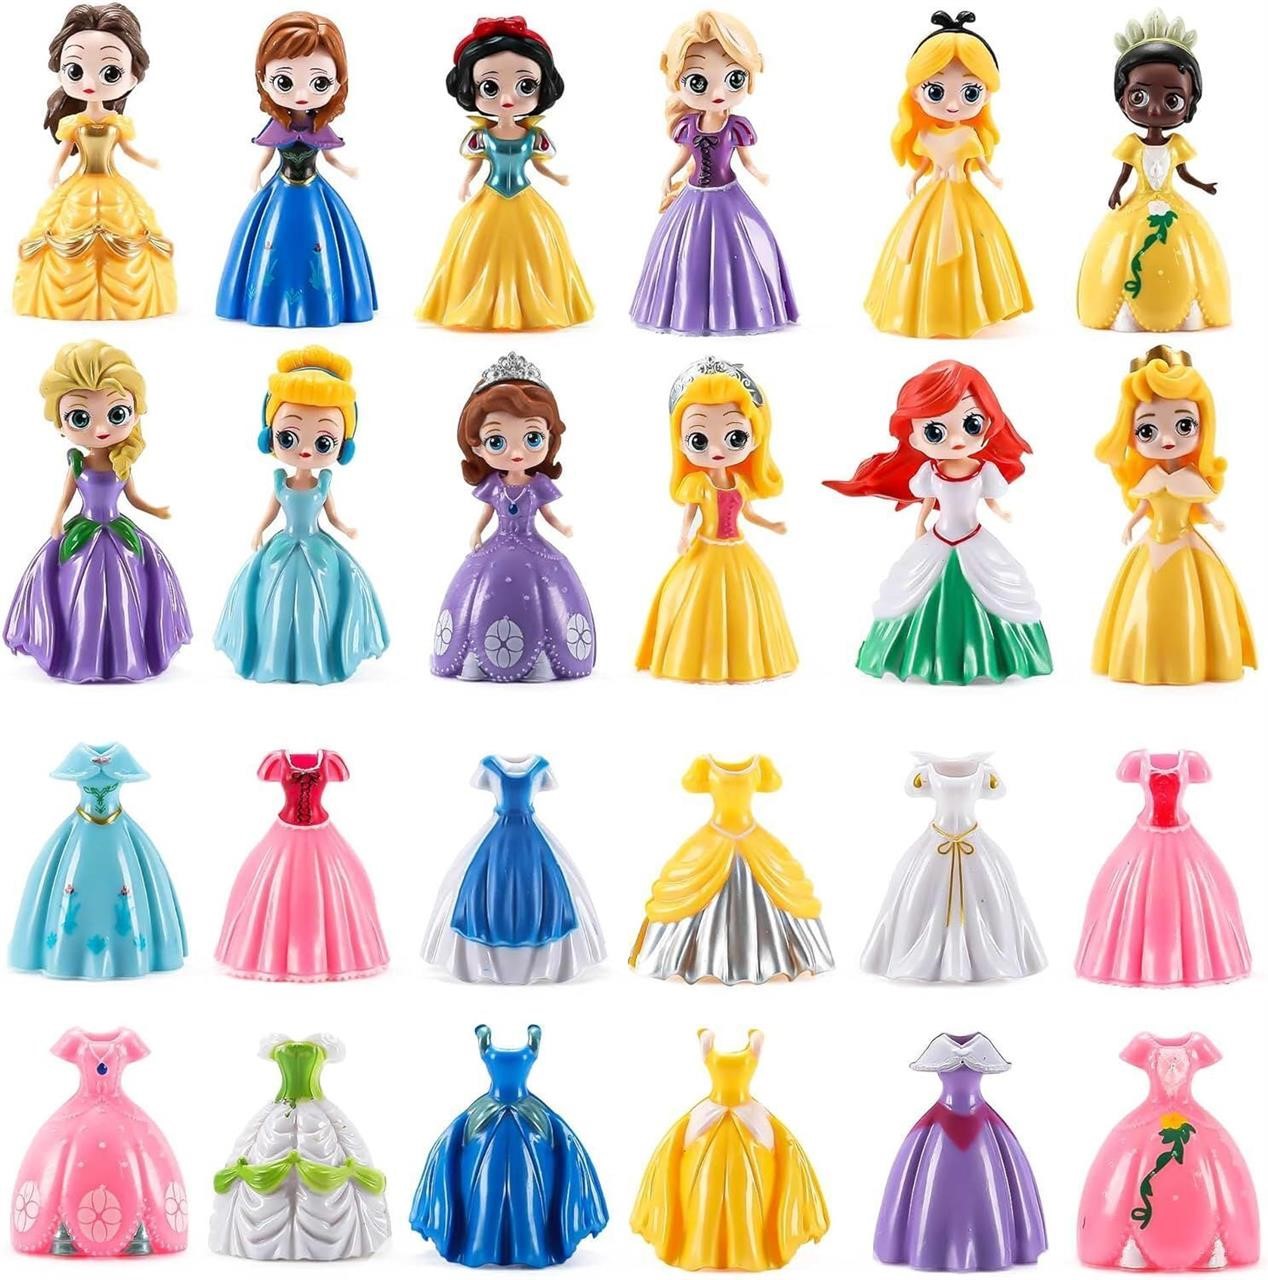 Princess Figures Toy-12 Princesses with Clothing